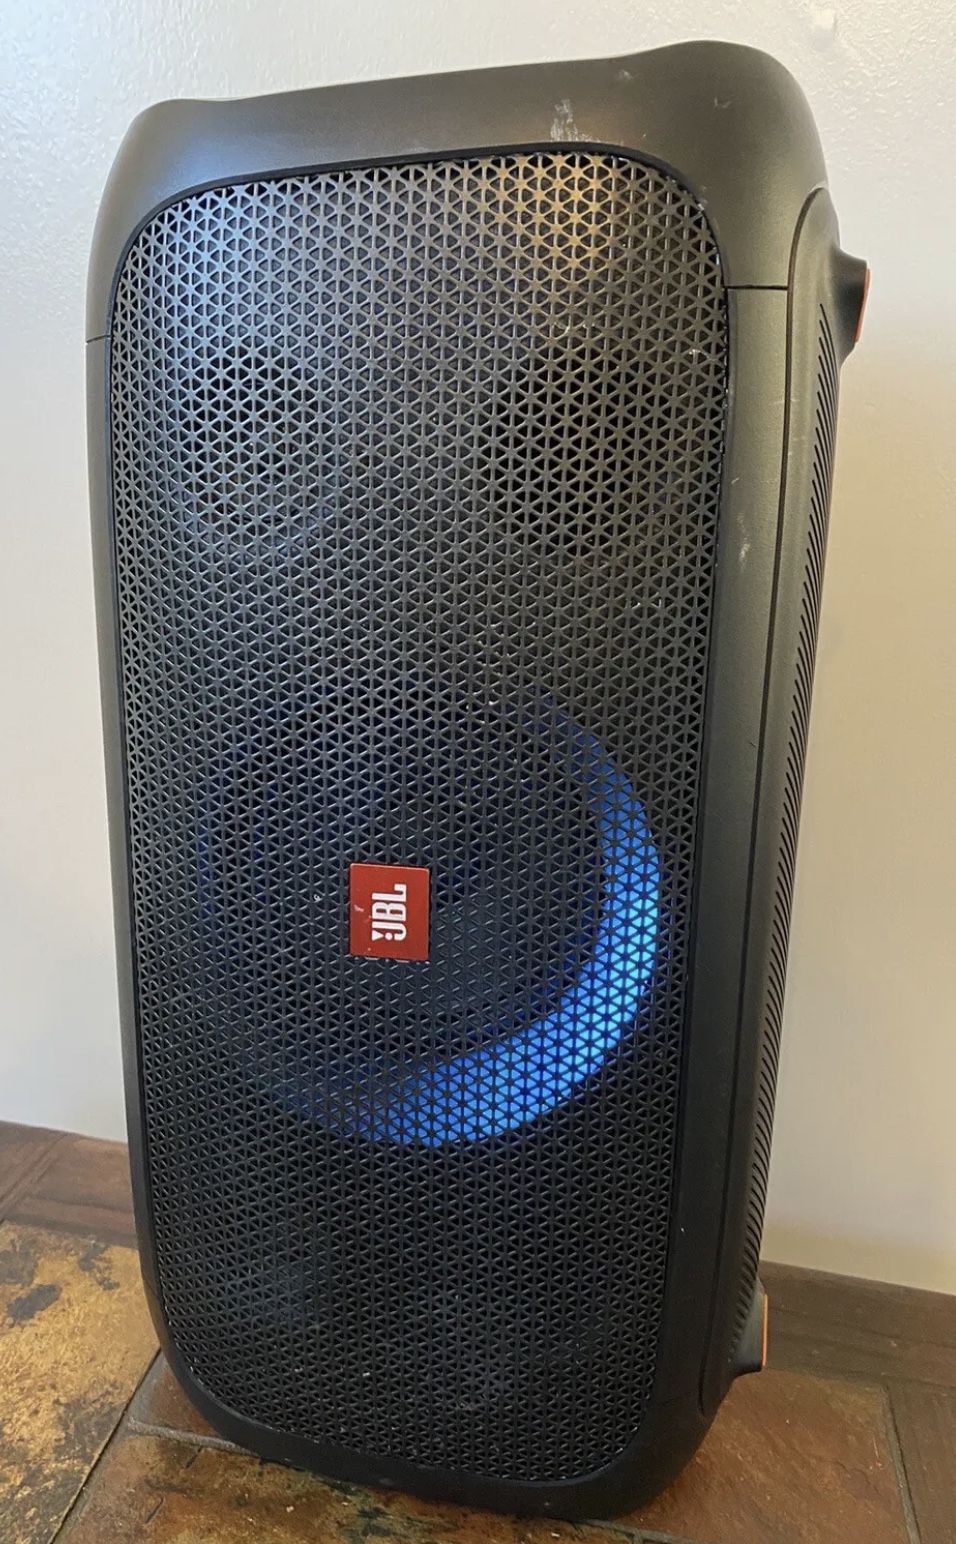 JBL PartyBox On-The-Go Bluetooth Party Speaker in Black  Firm price!!